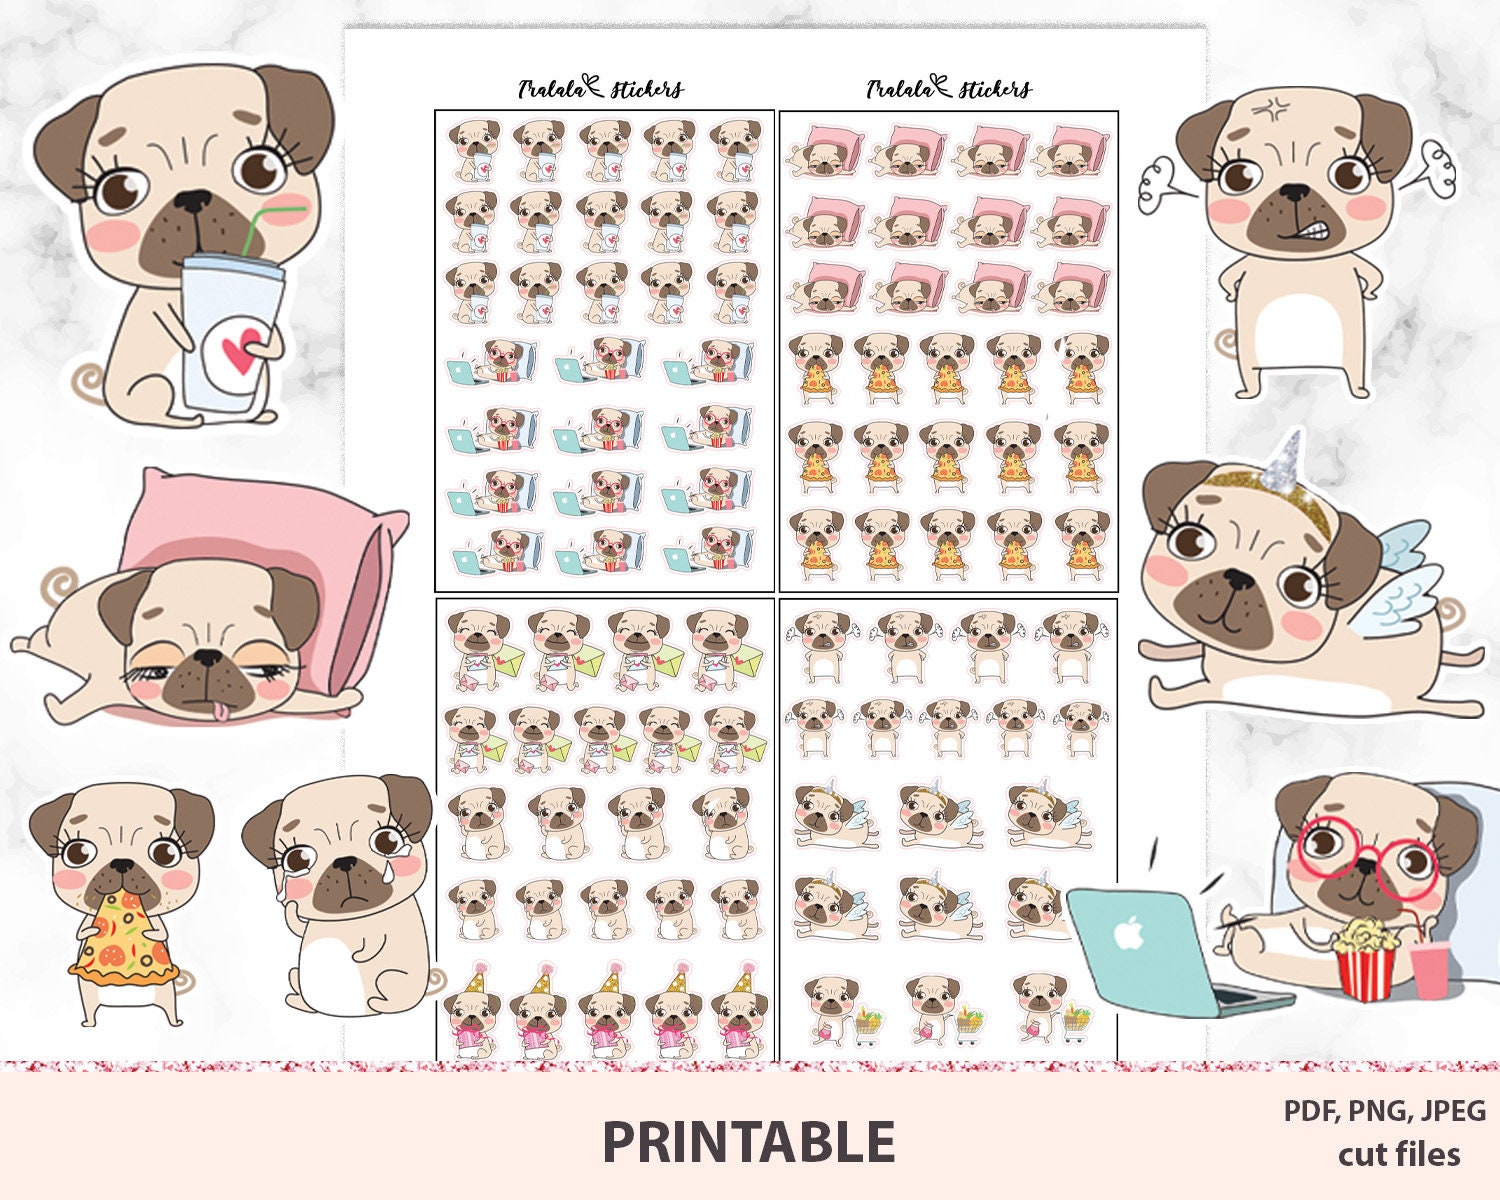 50PCS Kawaii Pug Dog Animal Stickers Waterproof Stickers Decals for Children,Teens and Girls,Unique Durable Aesthetic Trendy Sticker Perfect for,Laptop,Computer,Phone 